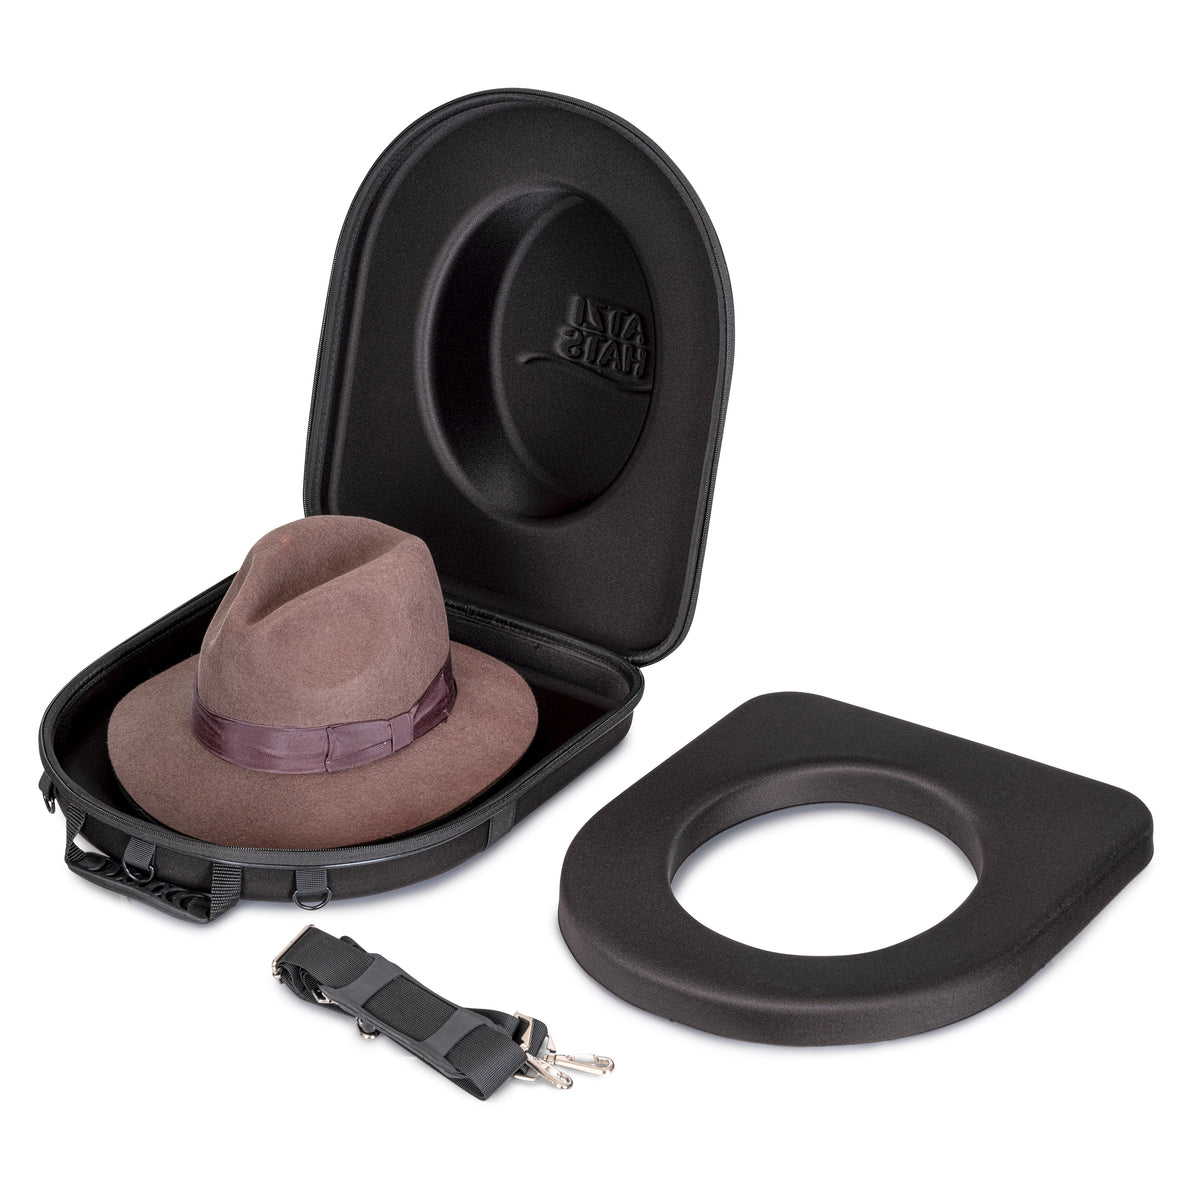 Western Hat Carrier - The Rider – Atzi Hats